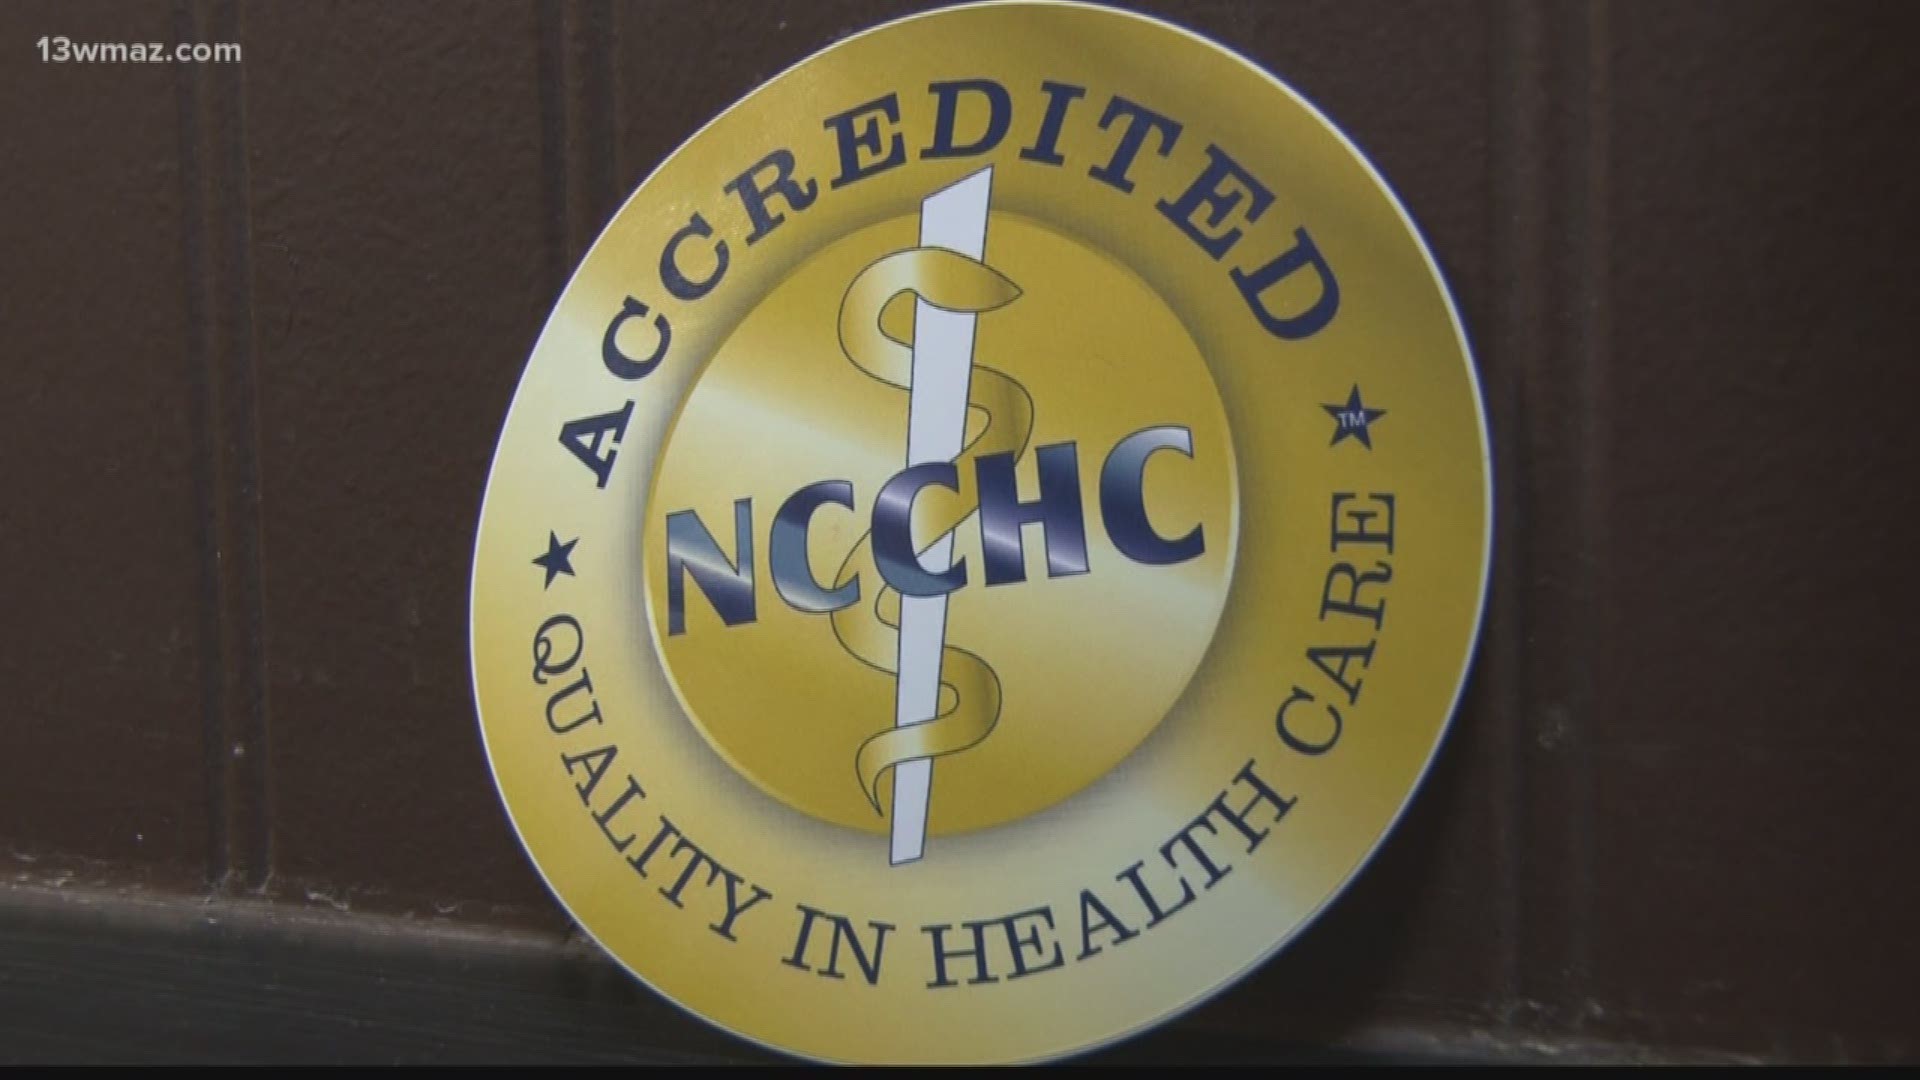 The Monroe County jail earned a national accreditation for the way they take care of their inmates health needs. Here's what that means for the county.